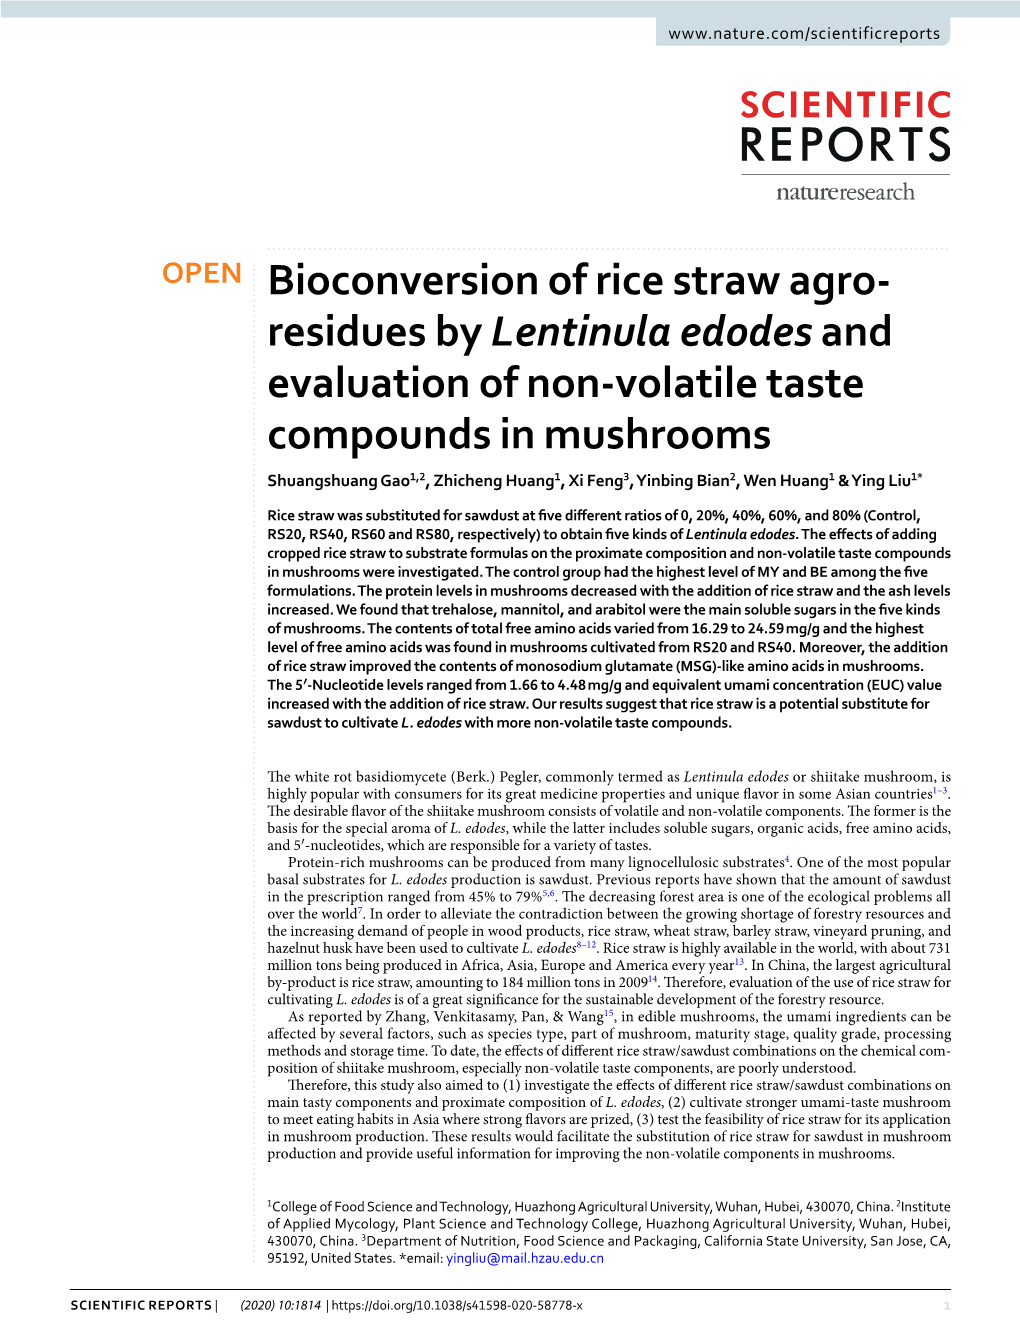 Bioconversion of Rice Straw Agro-Residues by Lentinula Edodes